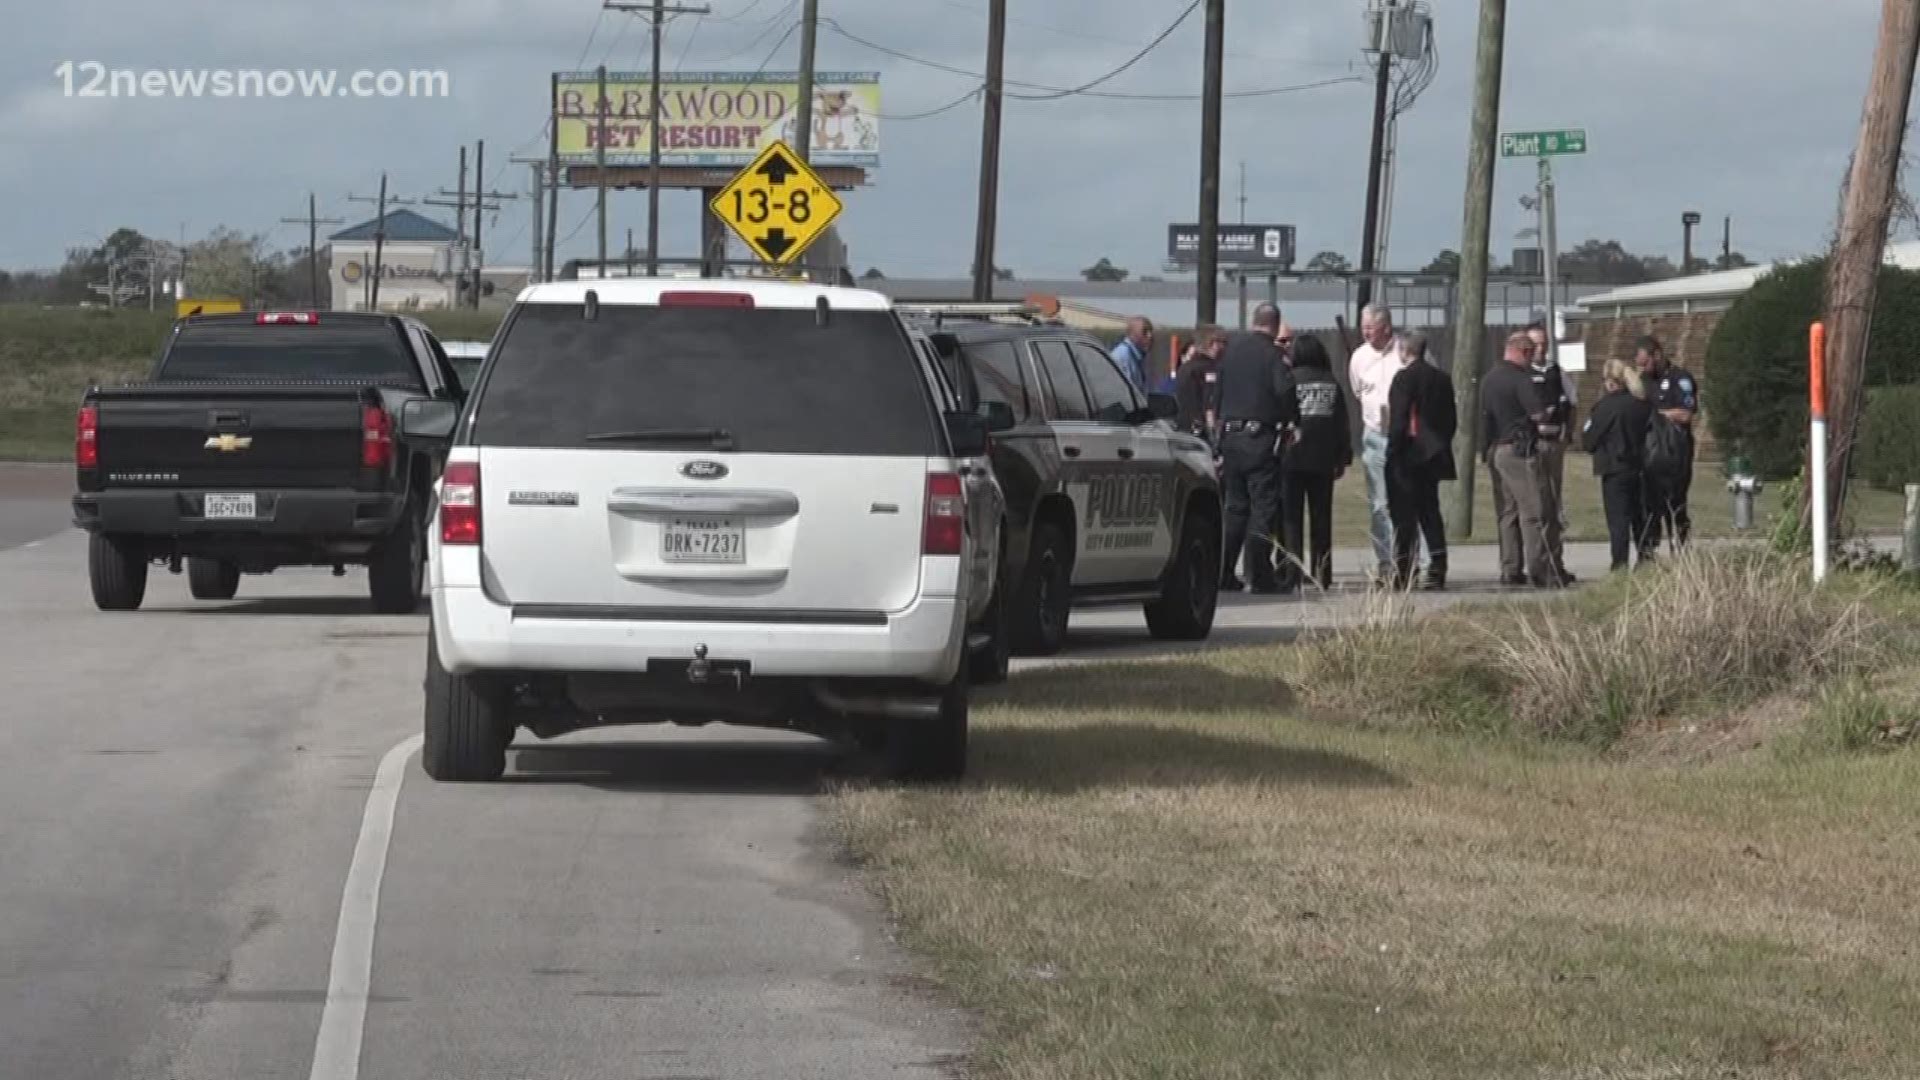 Officers check multiple bomb threats across Beaumont